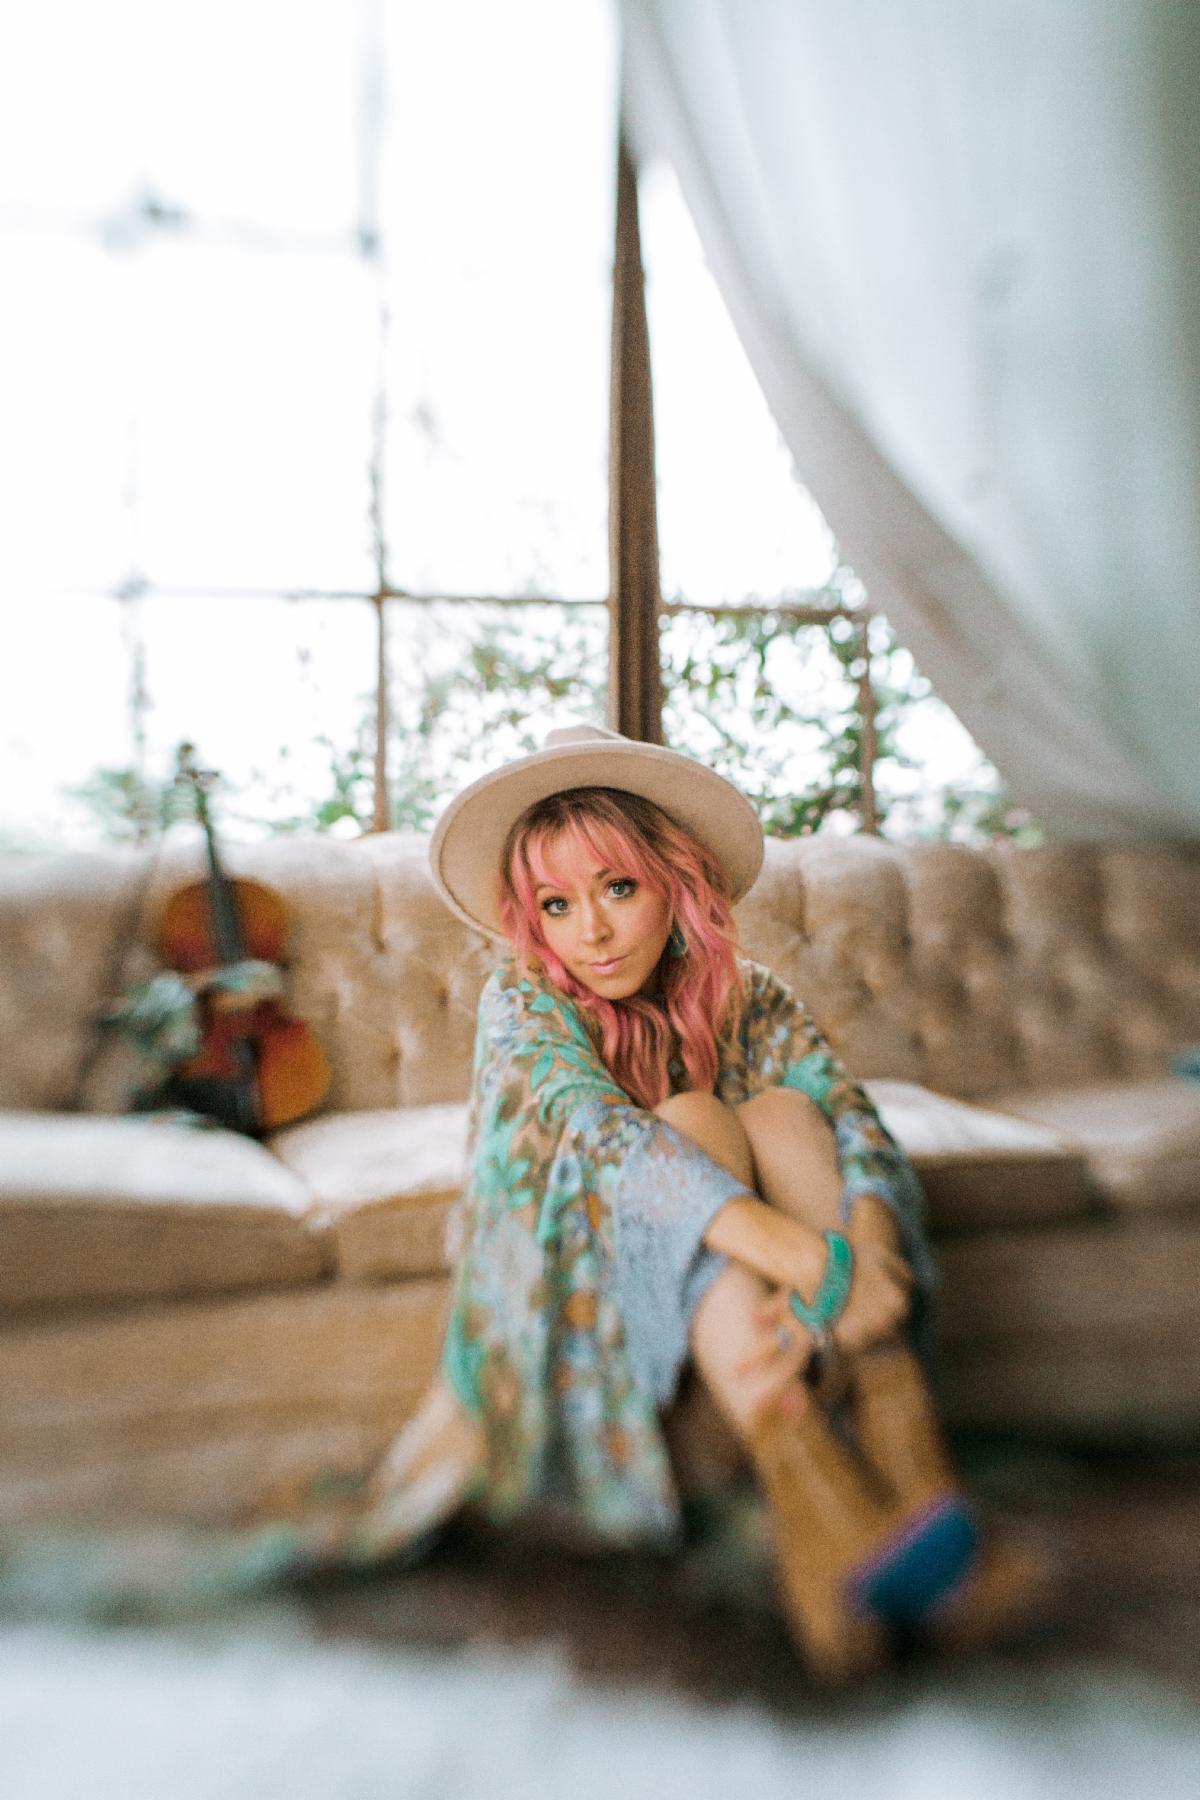 Lindsey Stirling Announces Charity Outreach Program The Upside Fund for COVID-19 Relief